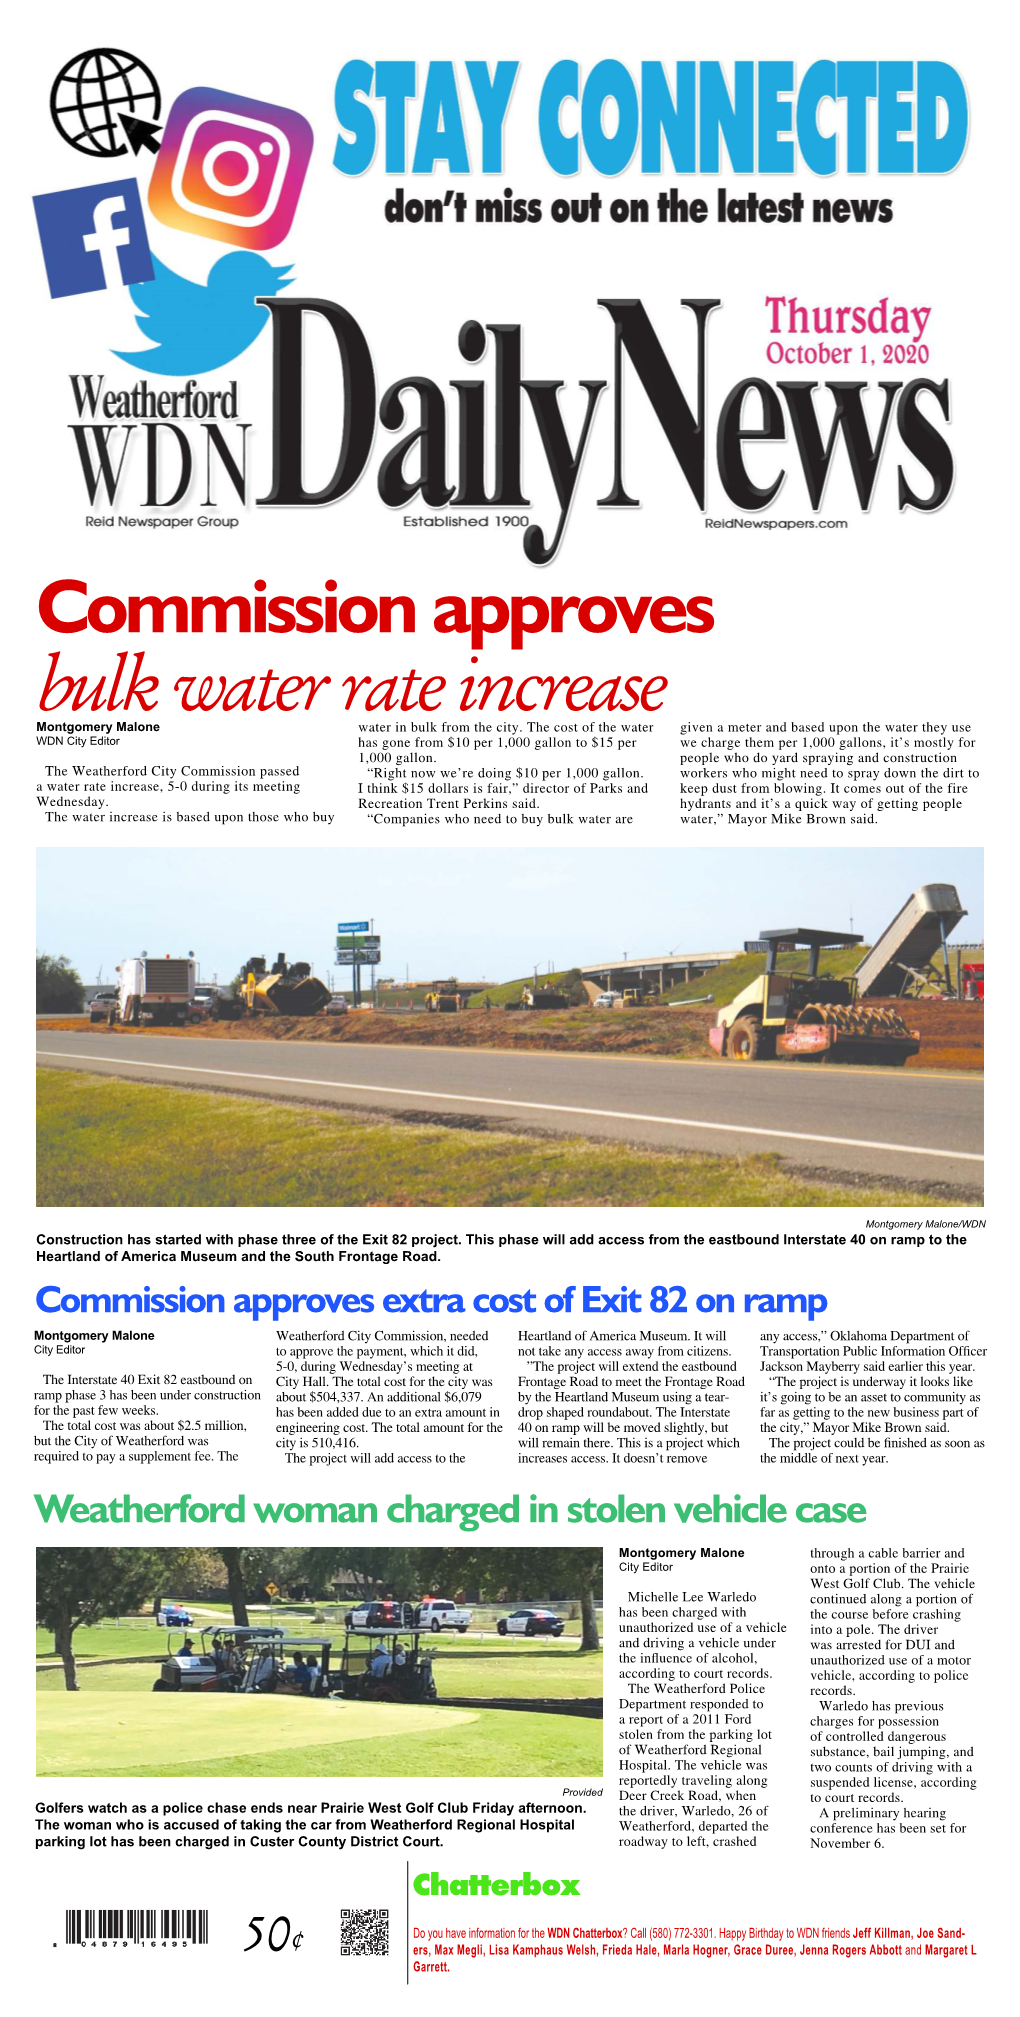 Commission Approves Bulk Water Rate Increase Montgomery Malone Water in Bulk from the City